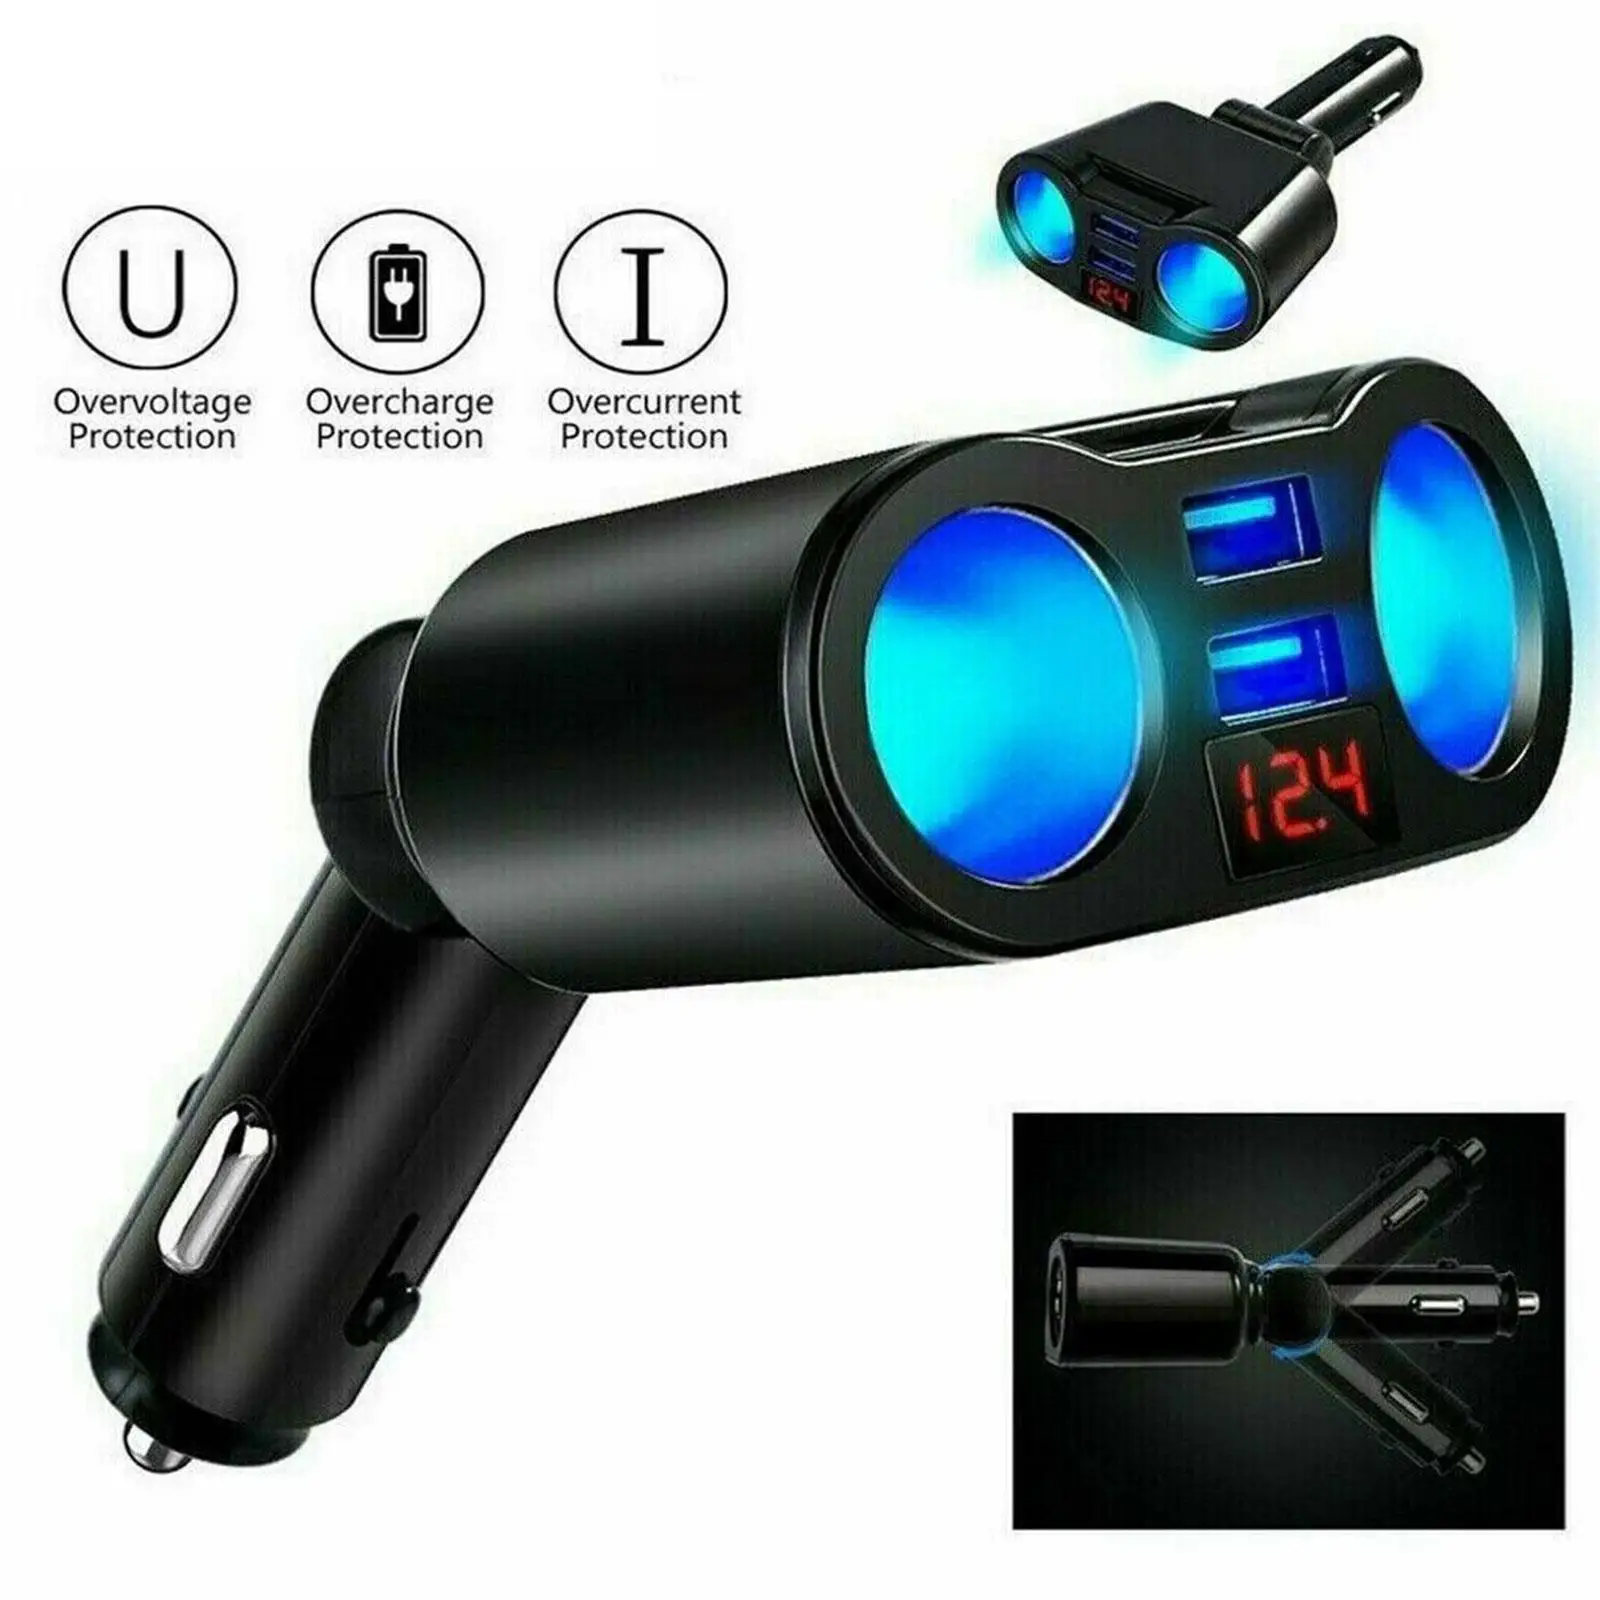 

3.1A Dual USB Car Charger 2 Port LCD Display 12-24V Lighter Charger Styling Car Power Socket Fast Adapter Cigarette Car A8C9